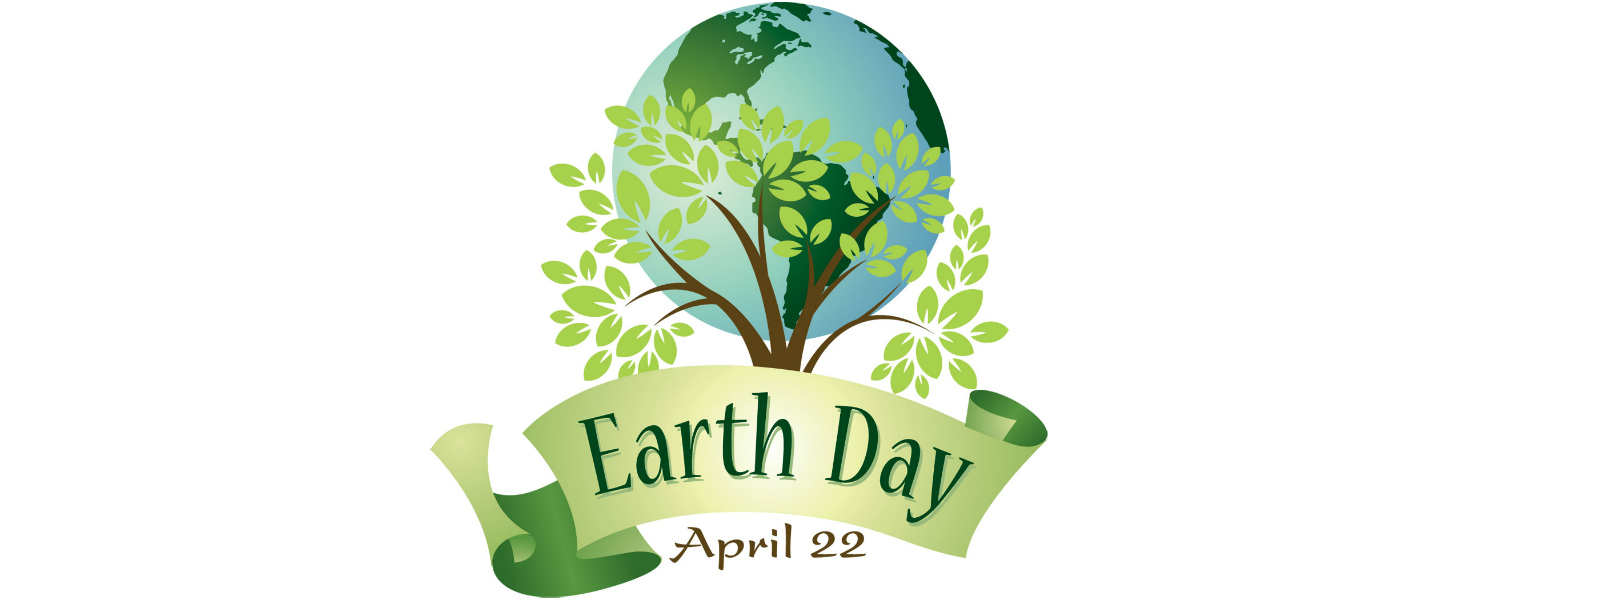 48th Earth day marked around the world